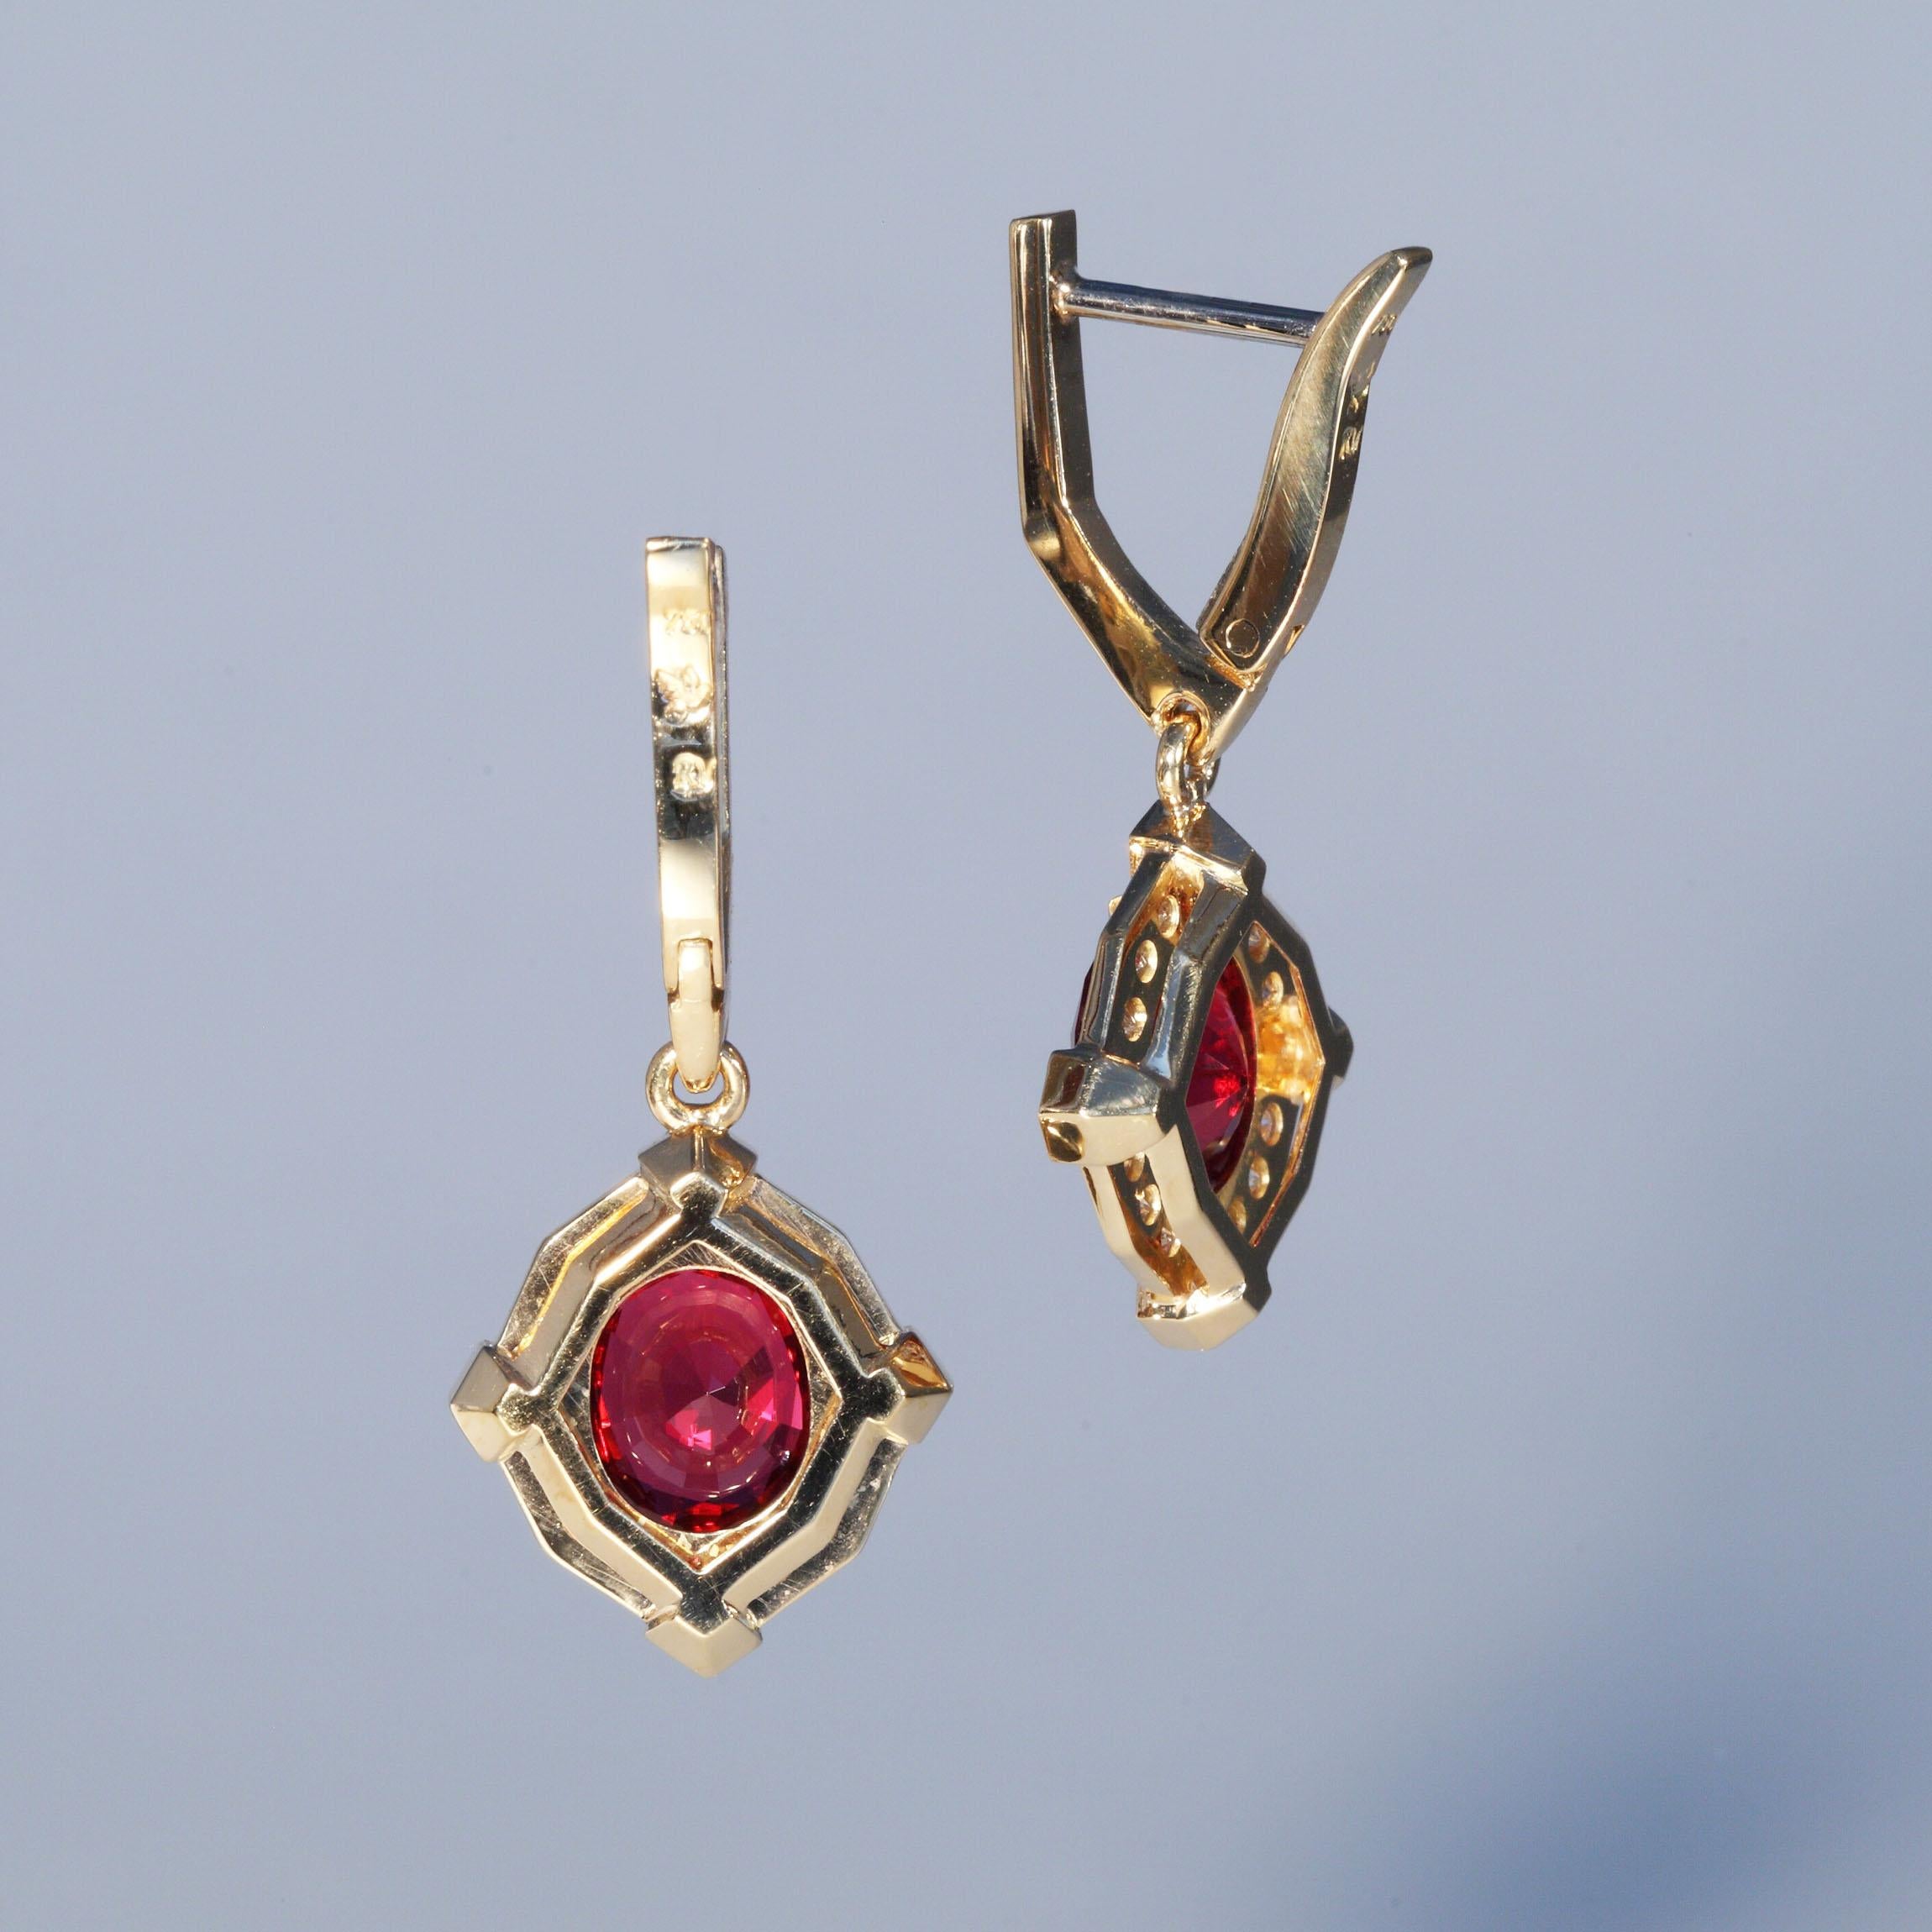 This fine pair of red Spinel of a total of 3.33 carat is set in 18 Karat rose gold with 0.60 carats of Diamonds F,G vvs. It is designed and hand made in Zurich, Switzerland by Robert Vogelsang and is a one of a kind piece signed RV.

The earrings